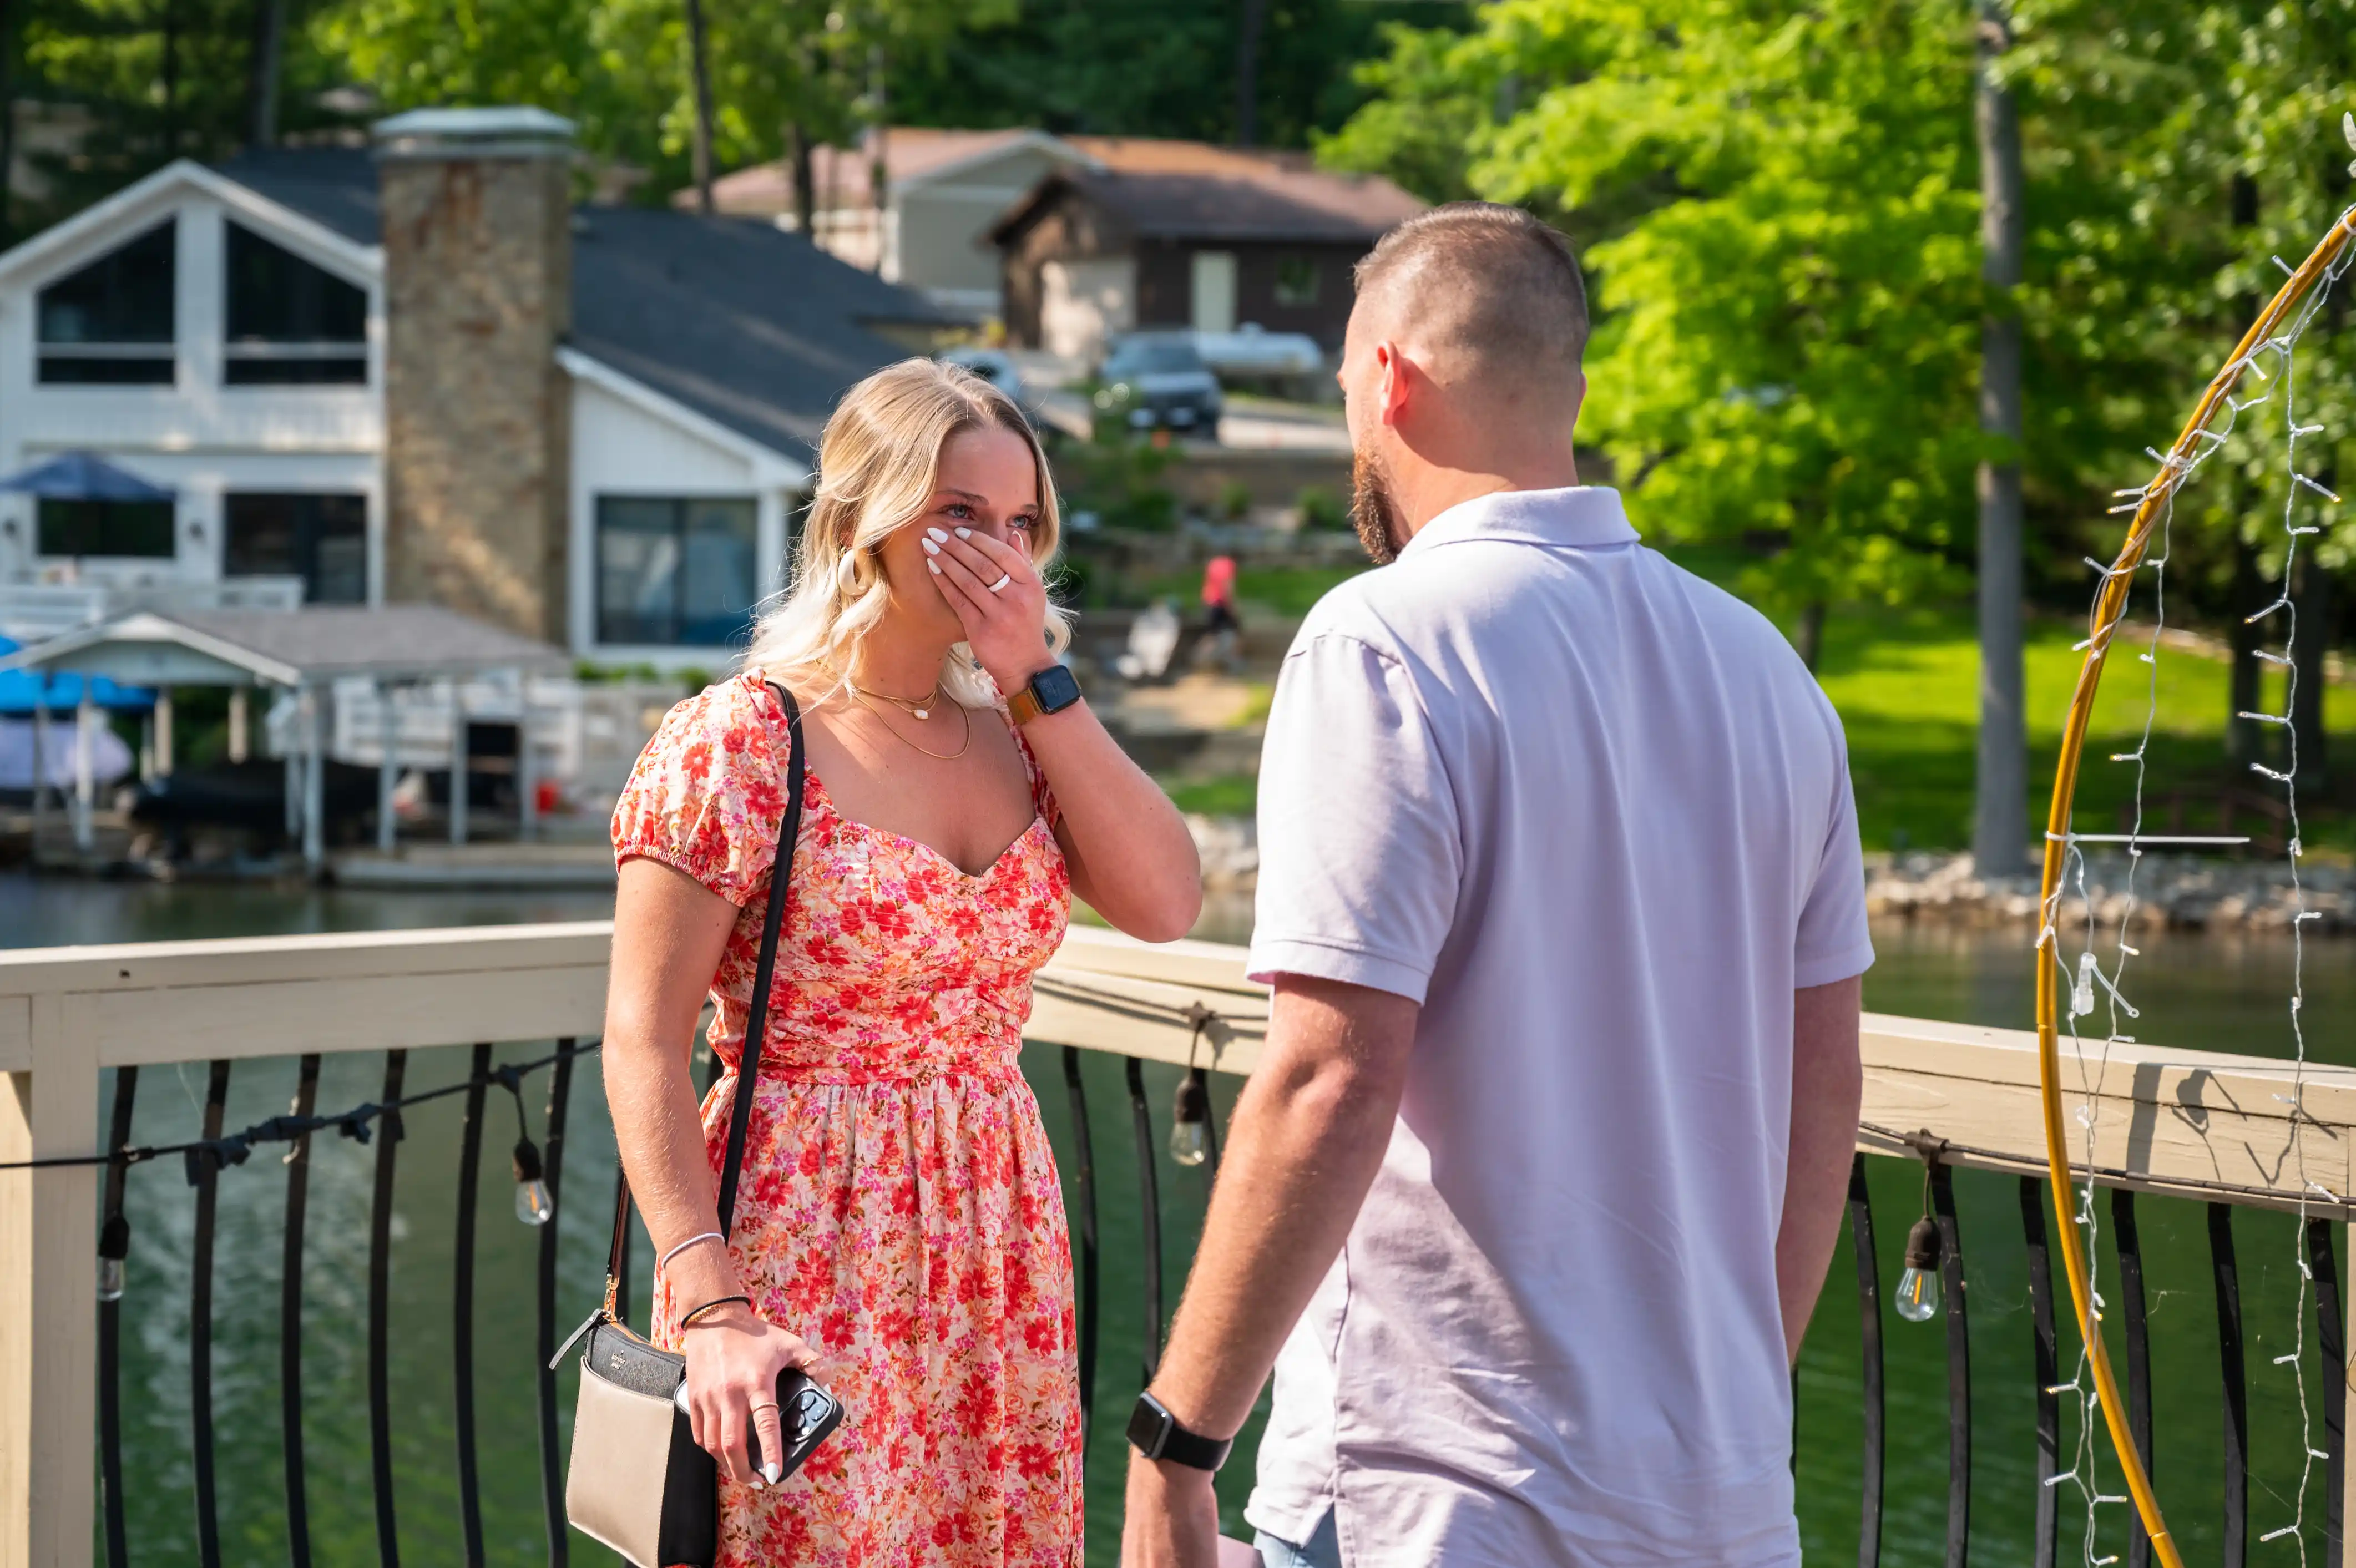 Two people having a conversation by a lakeside railing with houses and trees in the background.